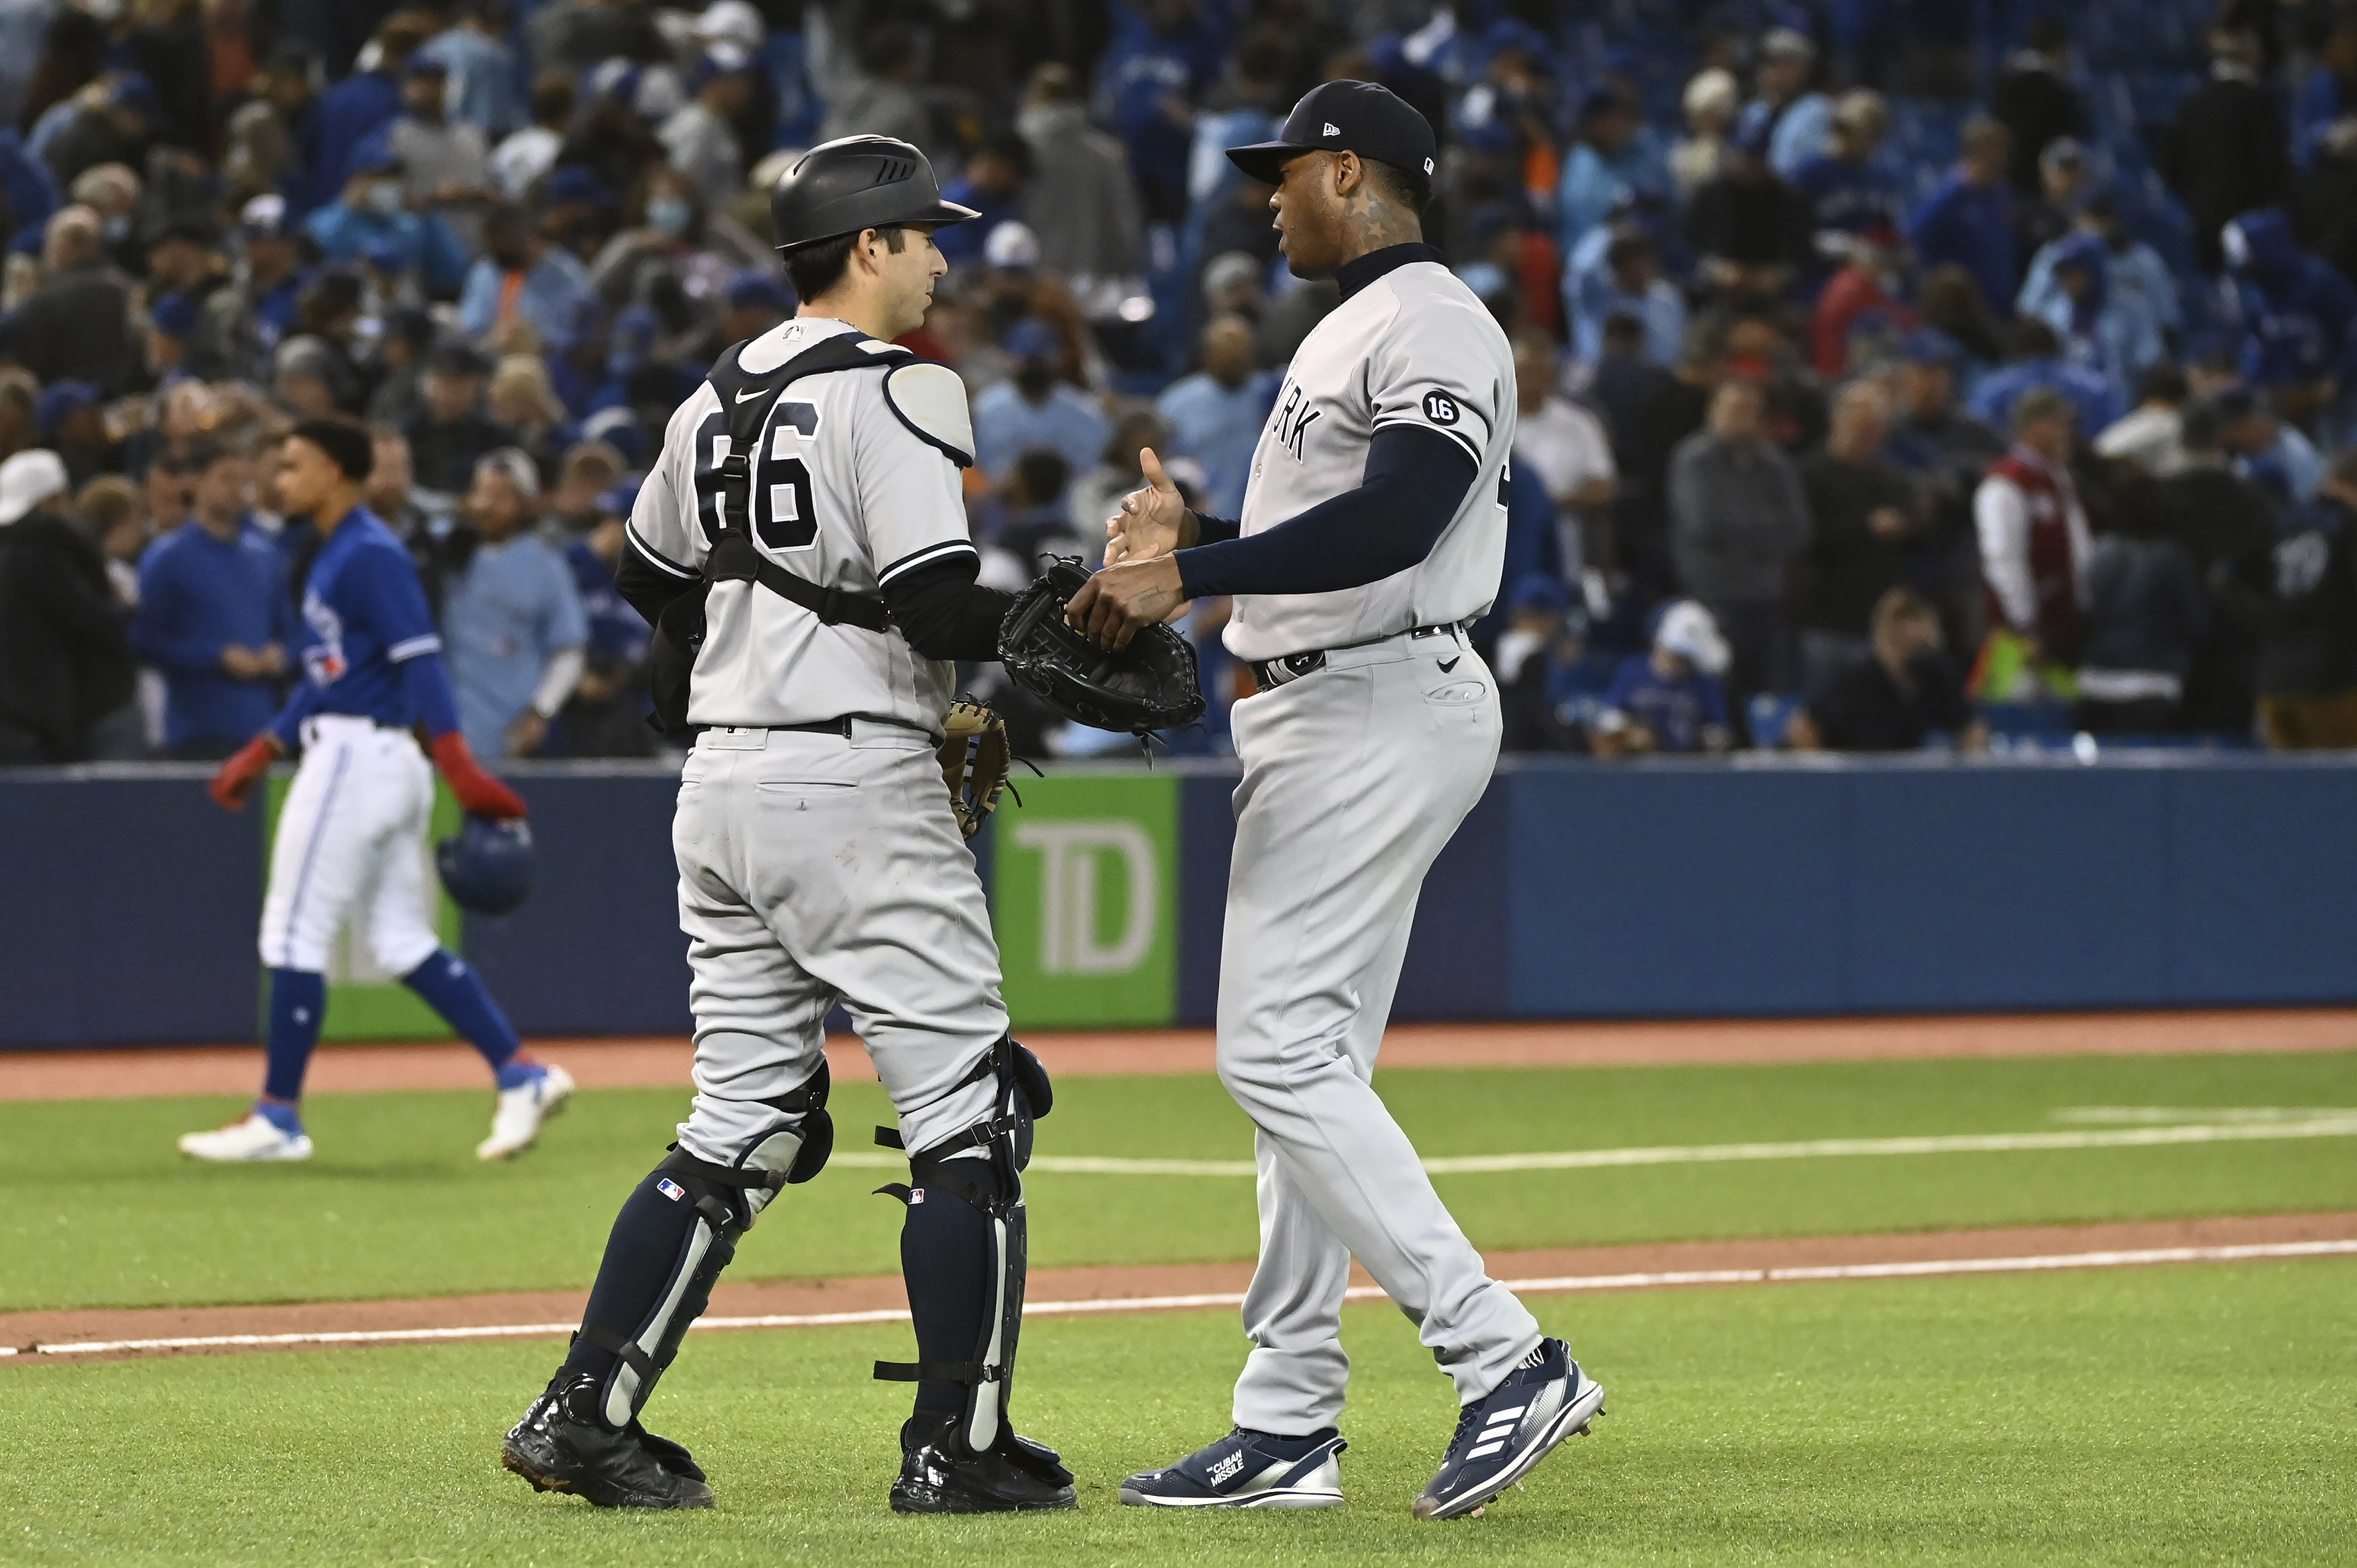 The Yankees could puncture Rays' playoff hopes over next month